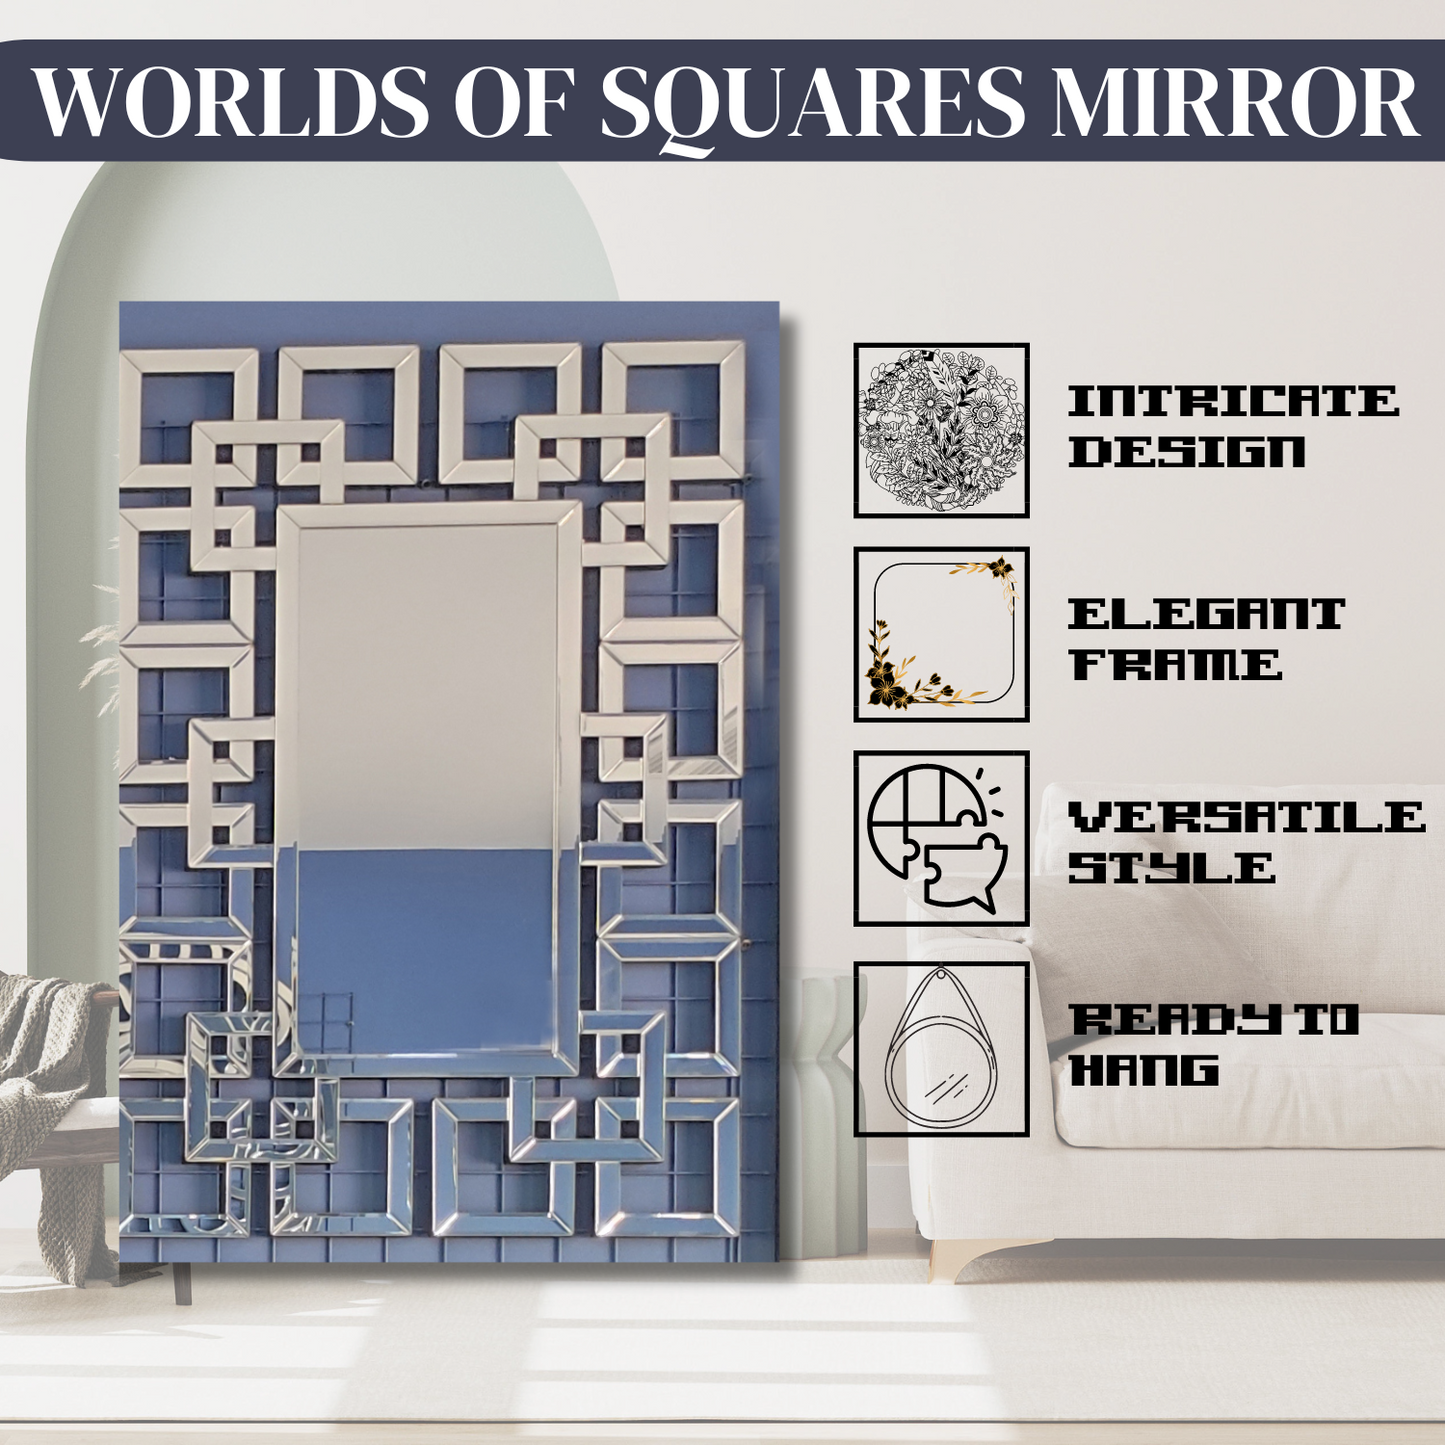 Worlds of Squares Reflection - Modern Wall Mirror with Geometric Intricacy for Contemporary Home Decor